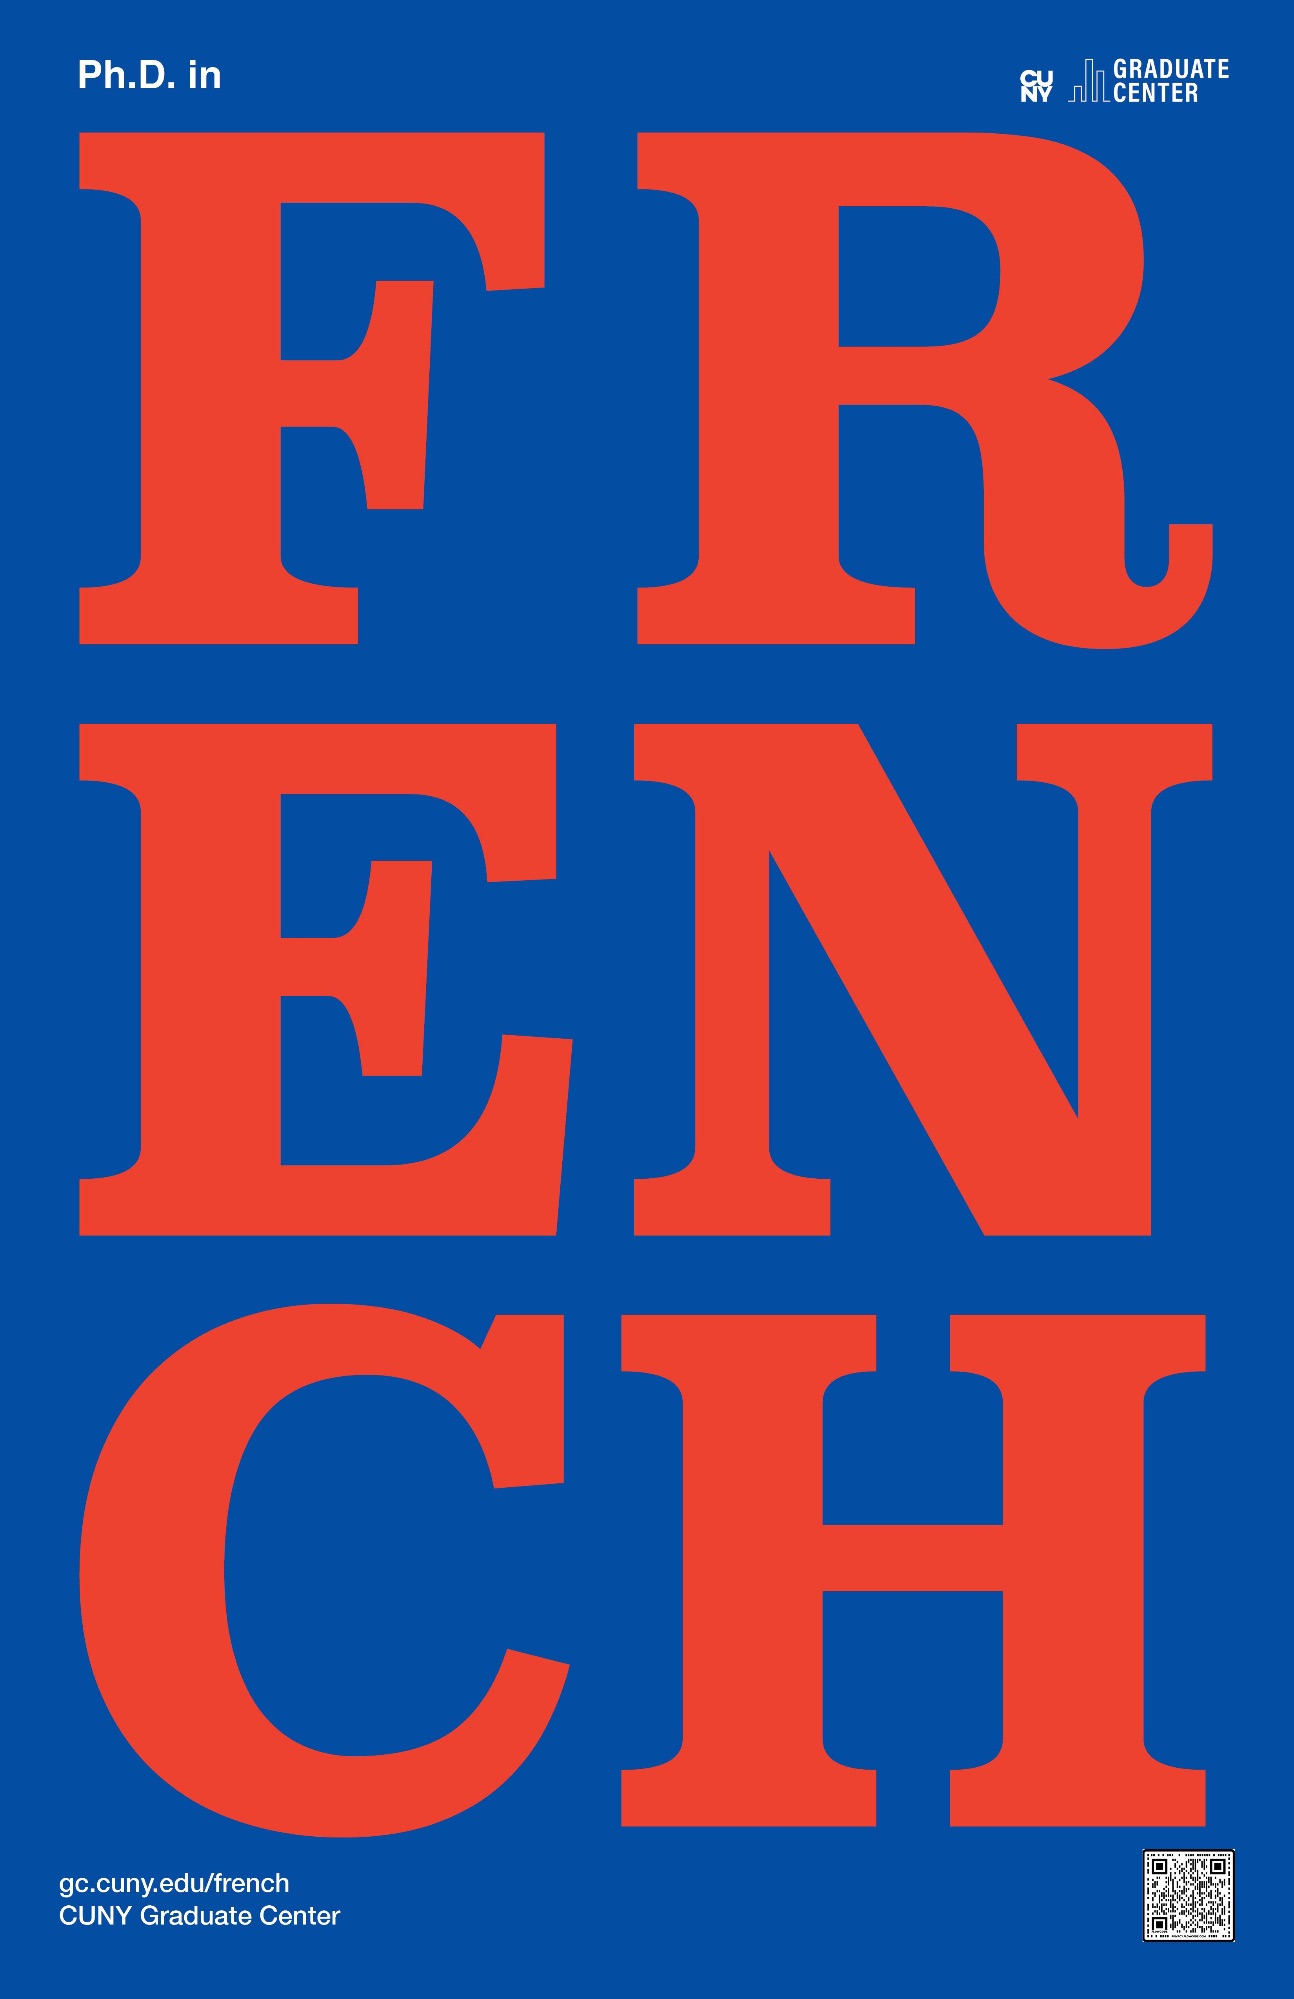 Ph.D. Program in French at the CUNY Graduate Center (New York)